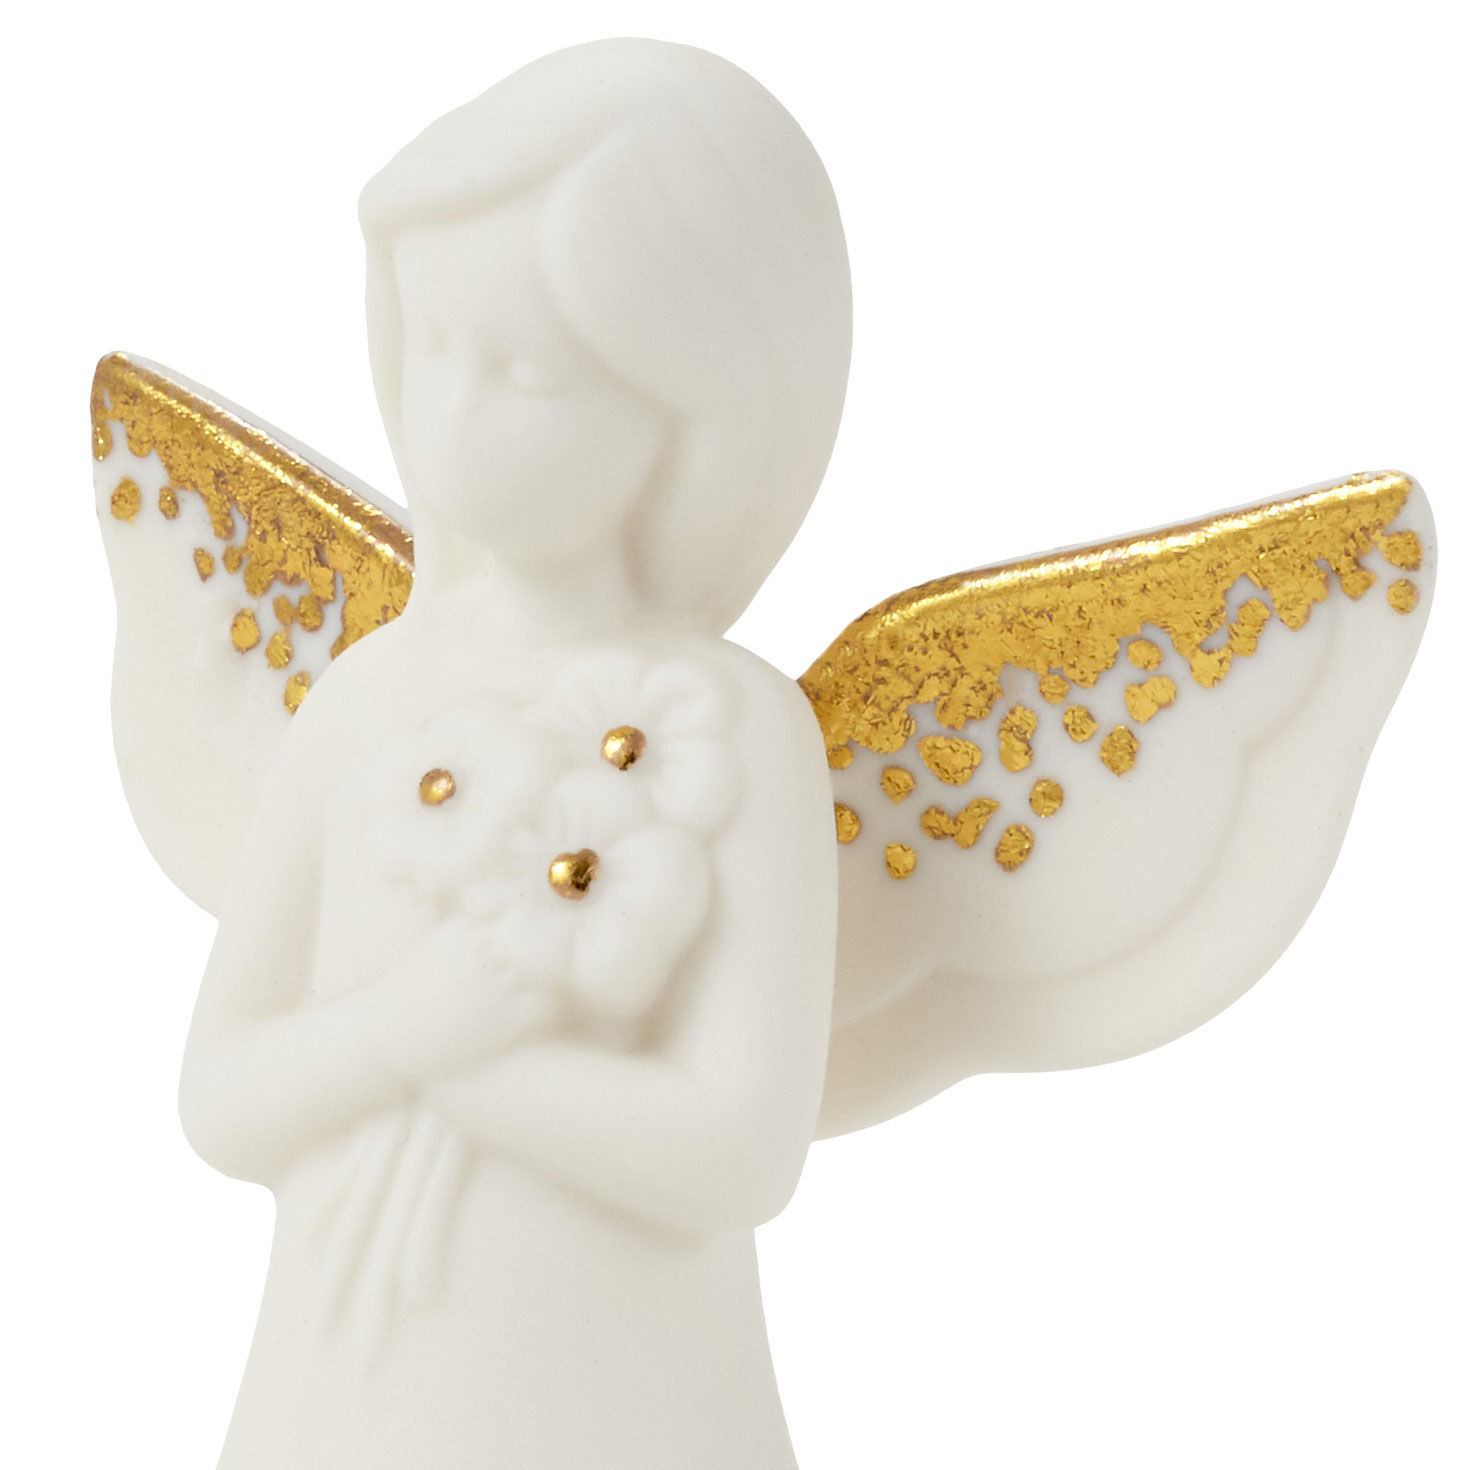 Daughter, A Precious Gift Angel Figurine, 3.8" for only USD 16.99 | Hallmark